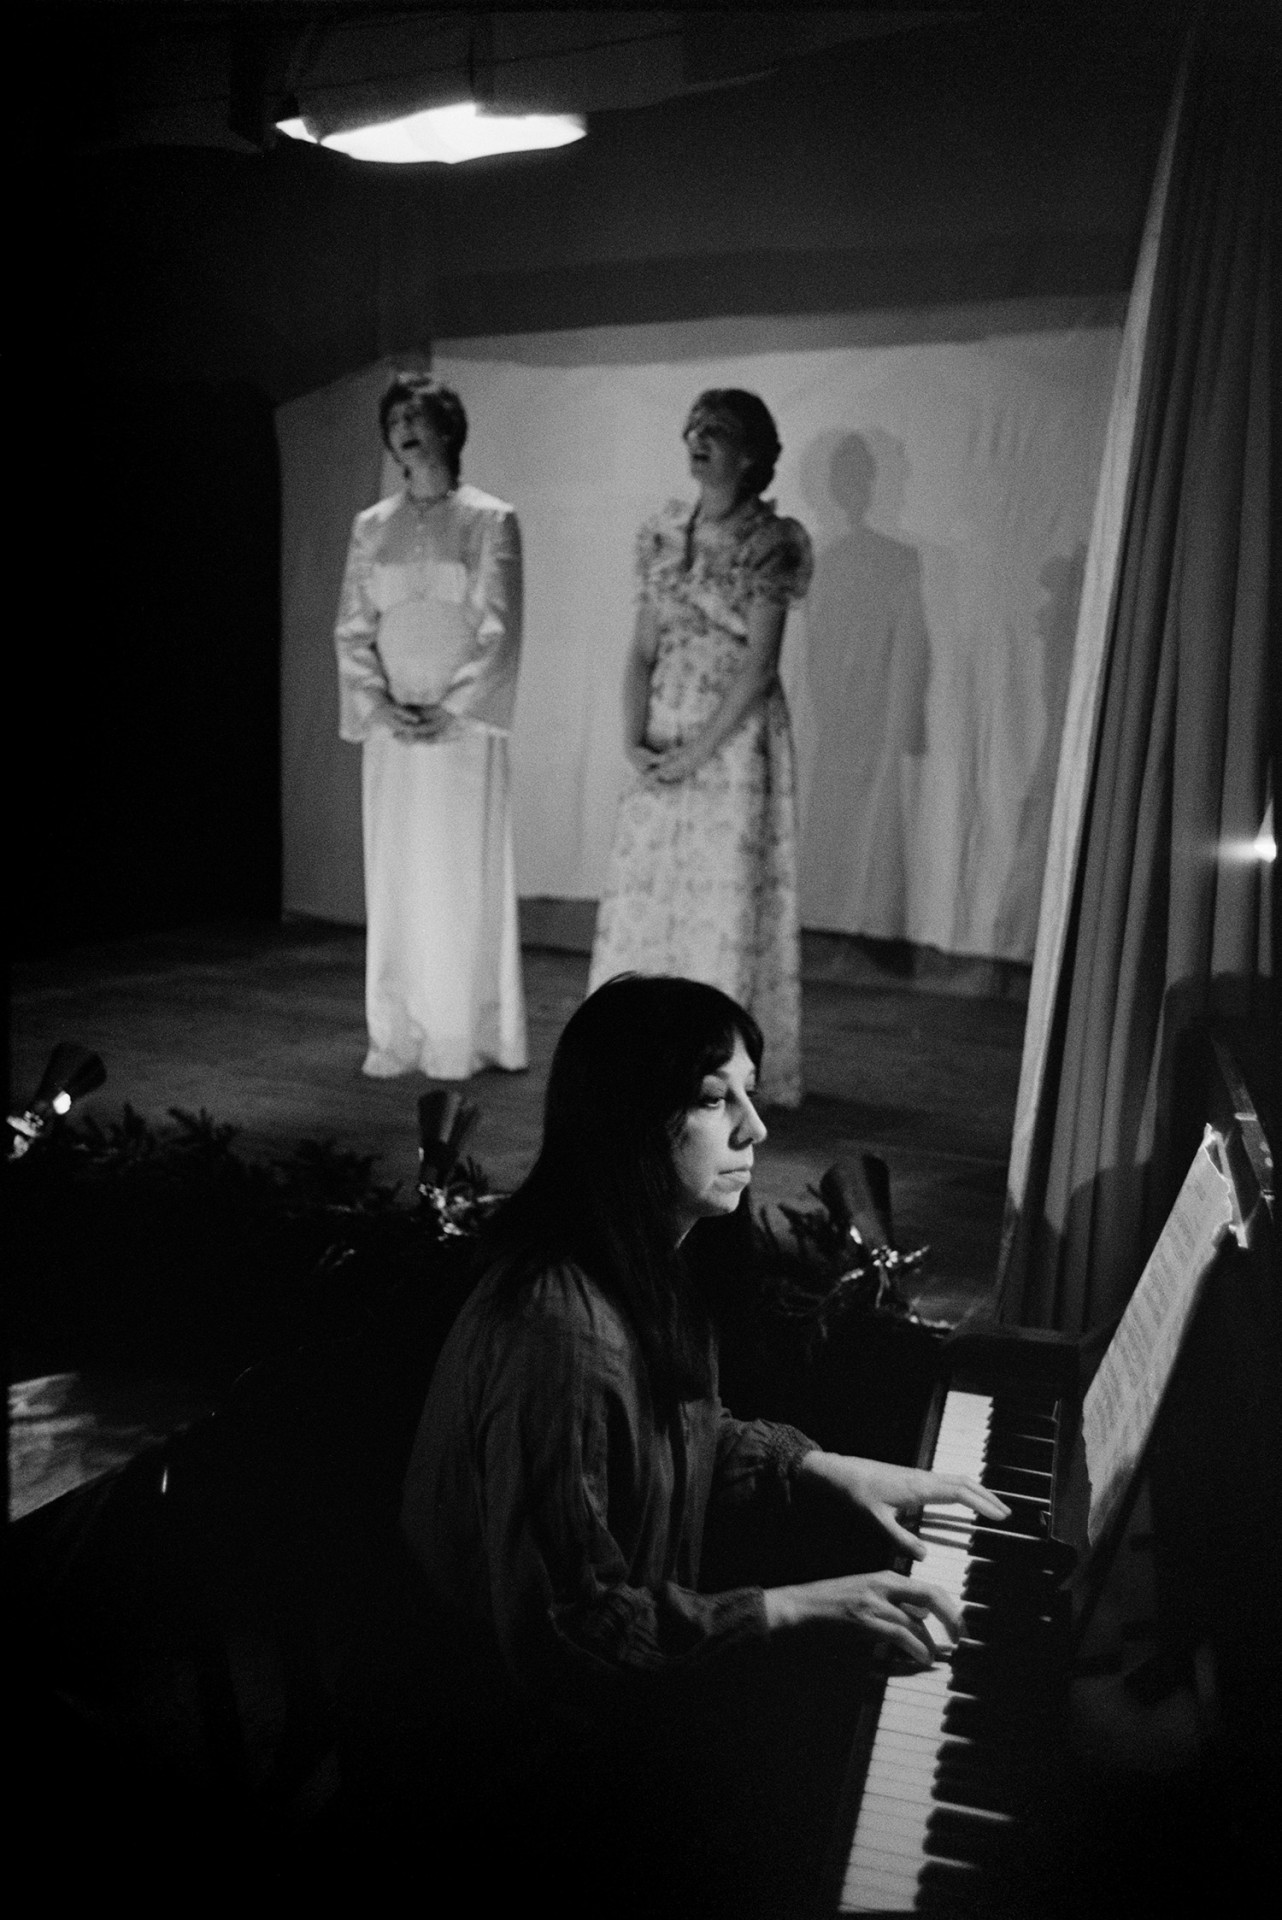 Christmas entertainment in village hall, singing and dance, short plays.
[Two women singing on stage at High Bickington village hall at an evening of Christmas entertainment. A woman in the foreground is accompanying them of the piano.]